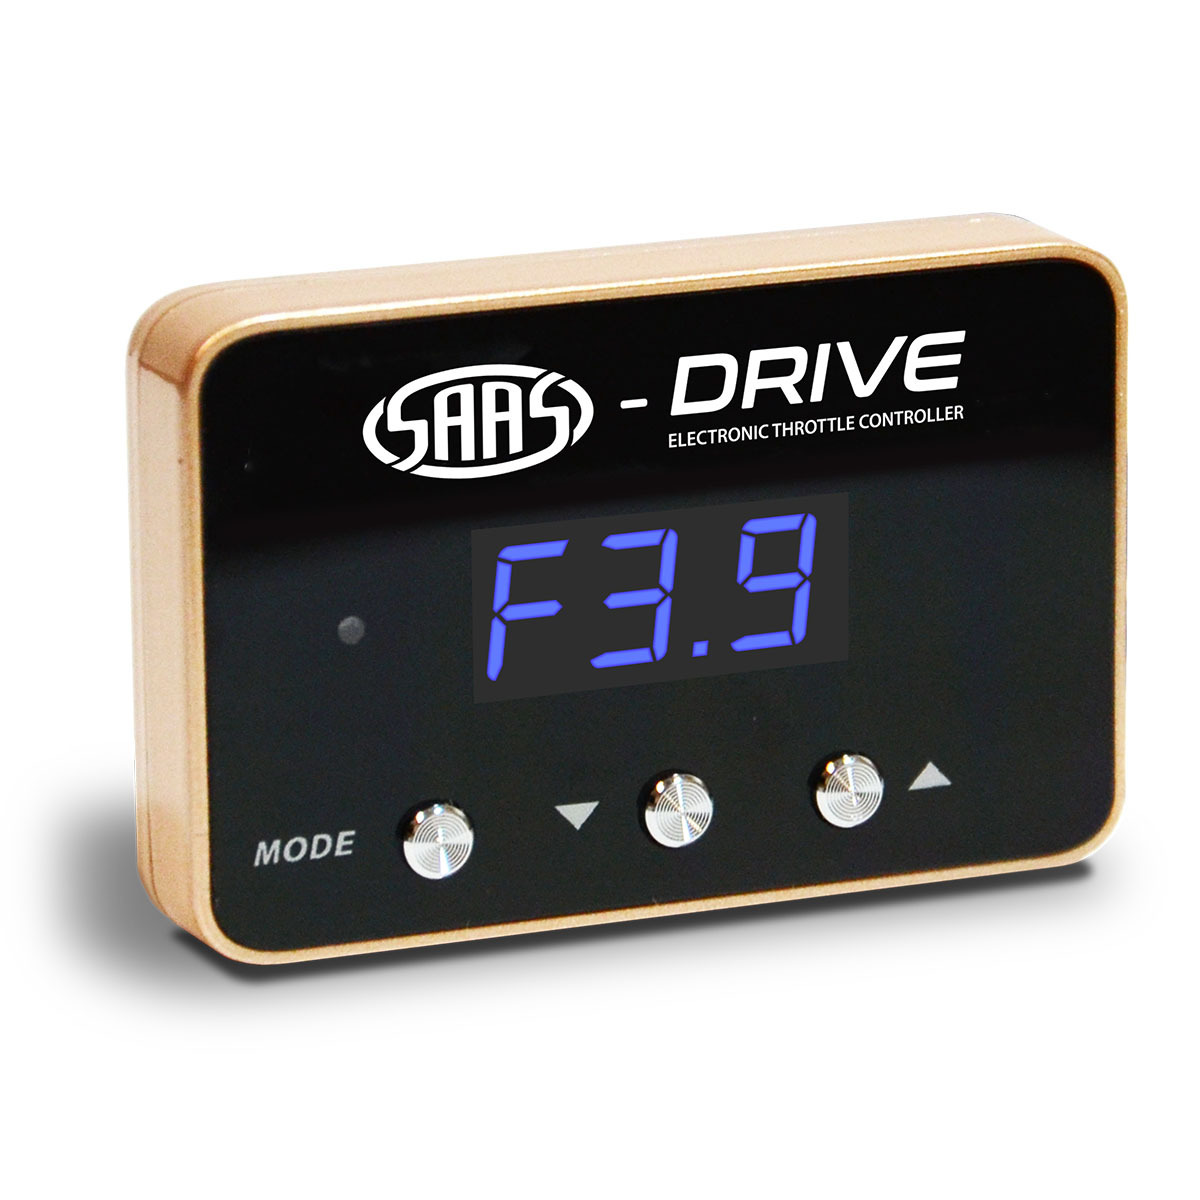 SAAS-Drive Ford Kuga 2nd Gen 2012 > Throttle Controller 